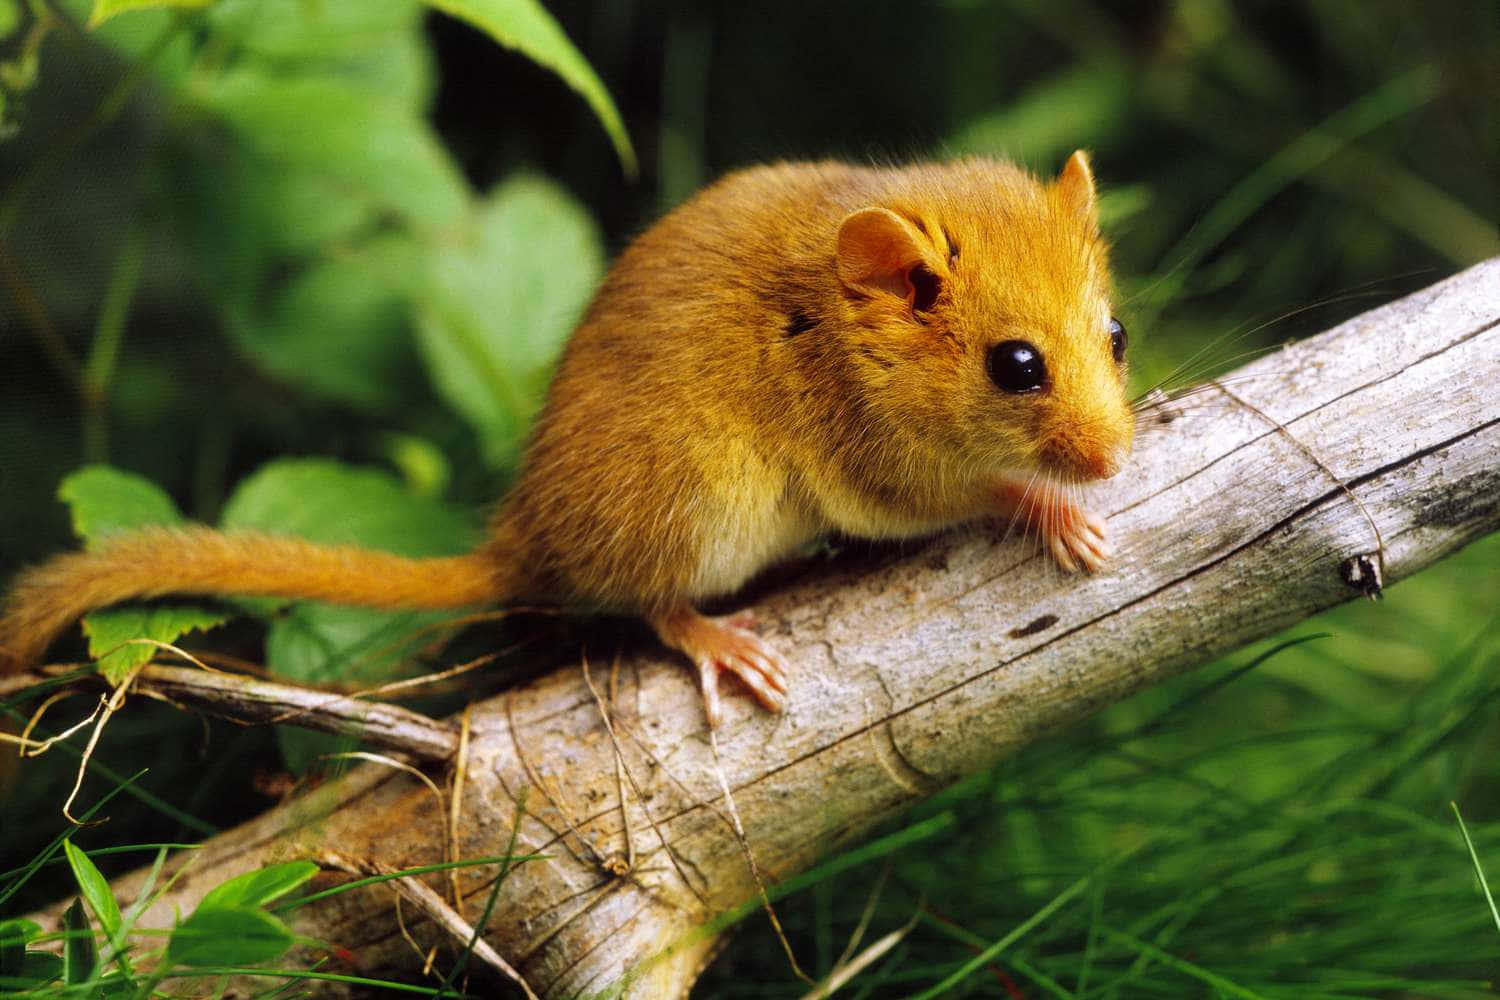 Close-up of a solitary mouse.